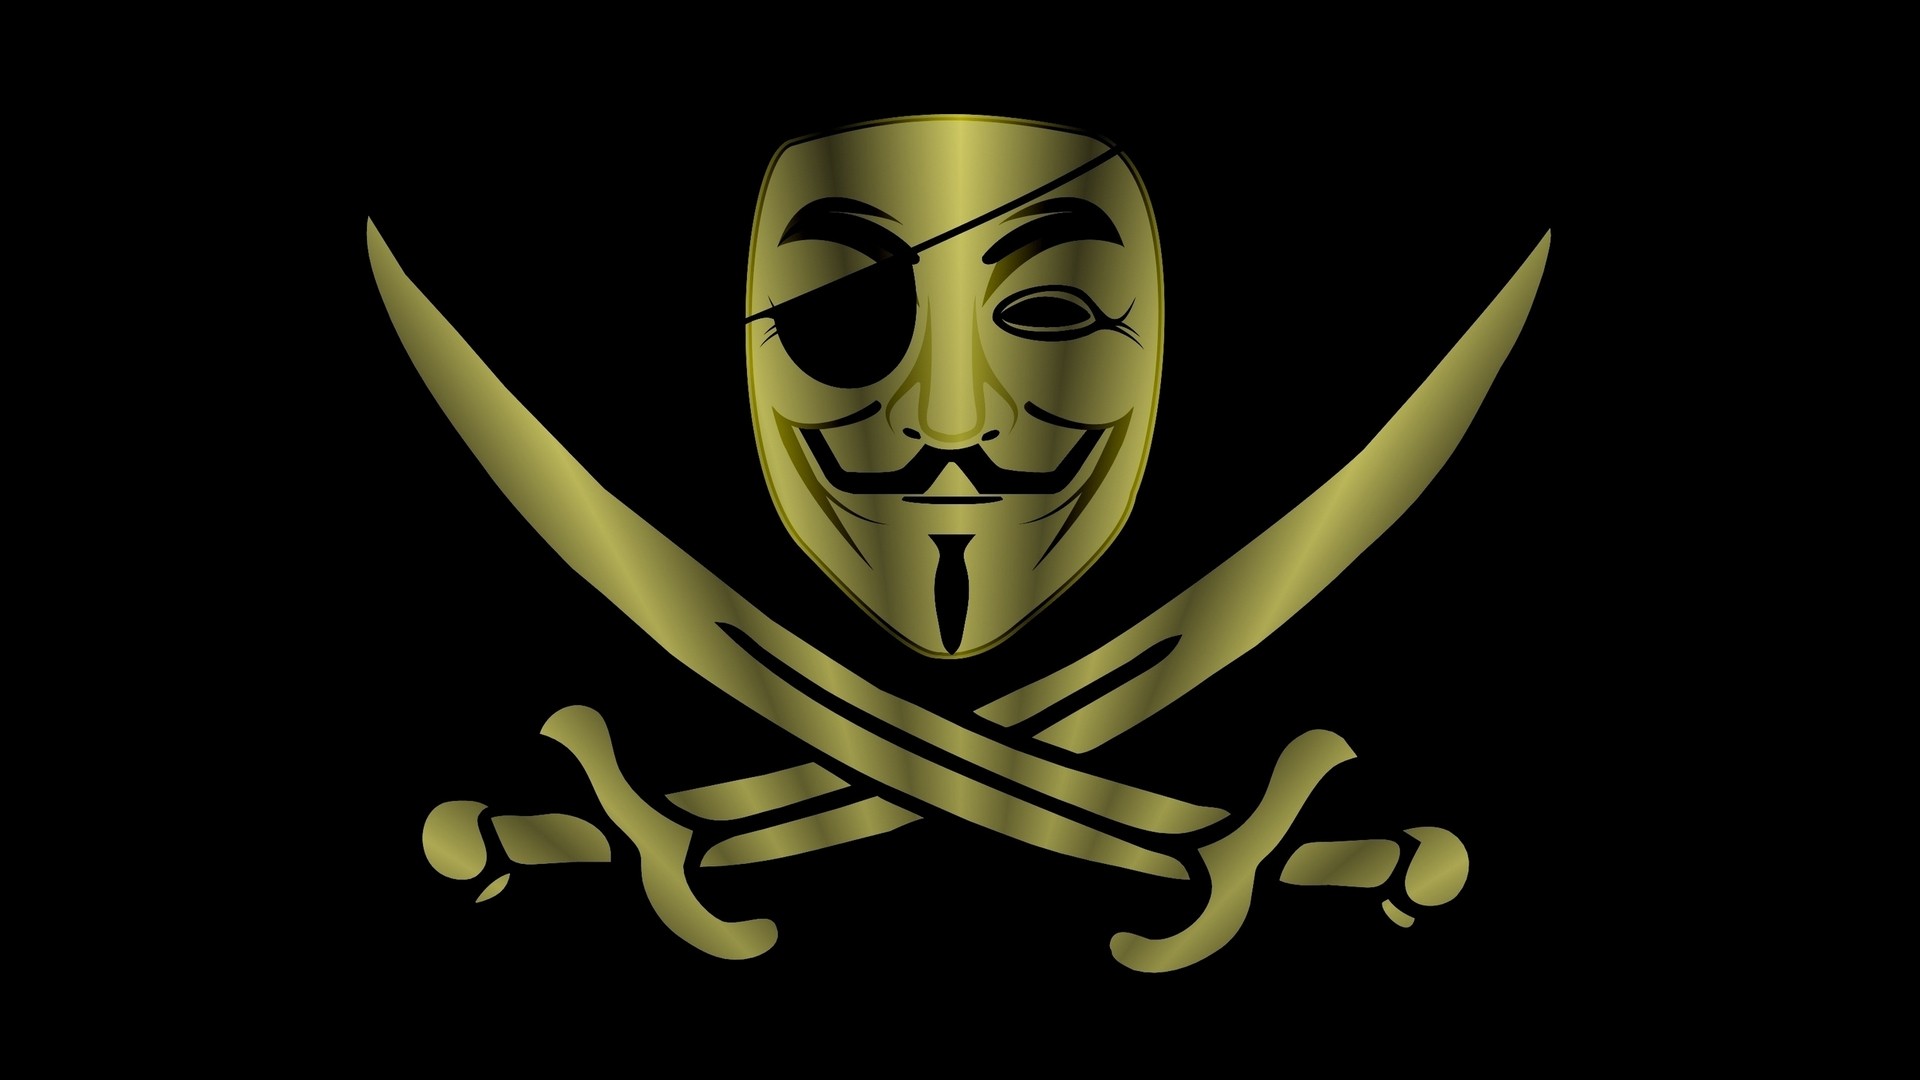 General 1920x1080 simple background Guy Fawkes mask eyepatches pirates mask weapon black background artwork